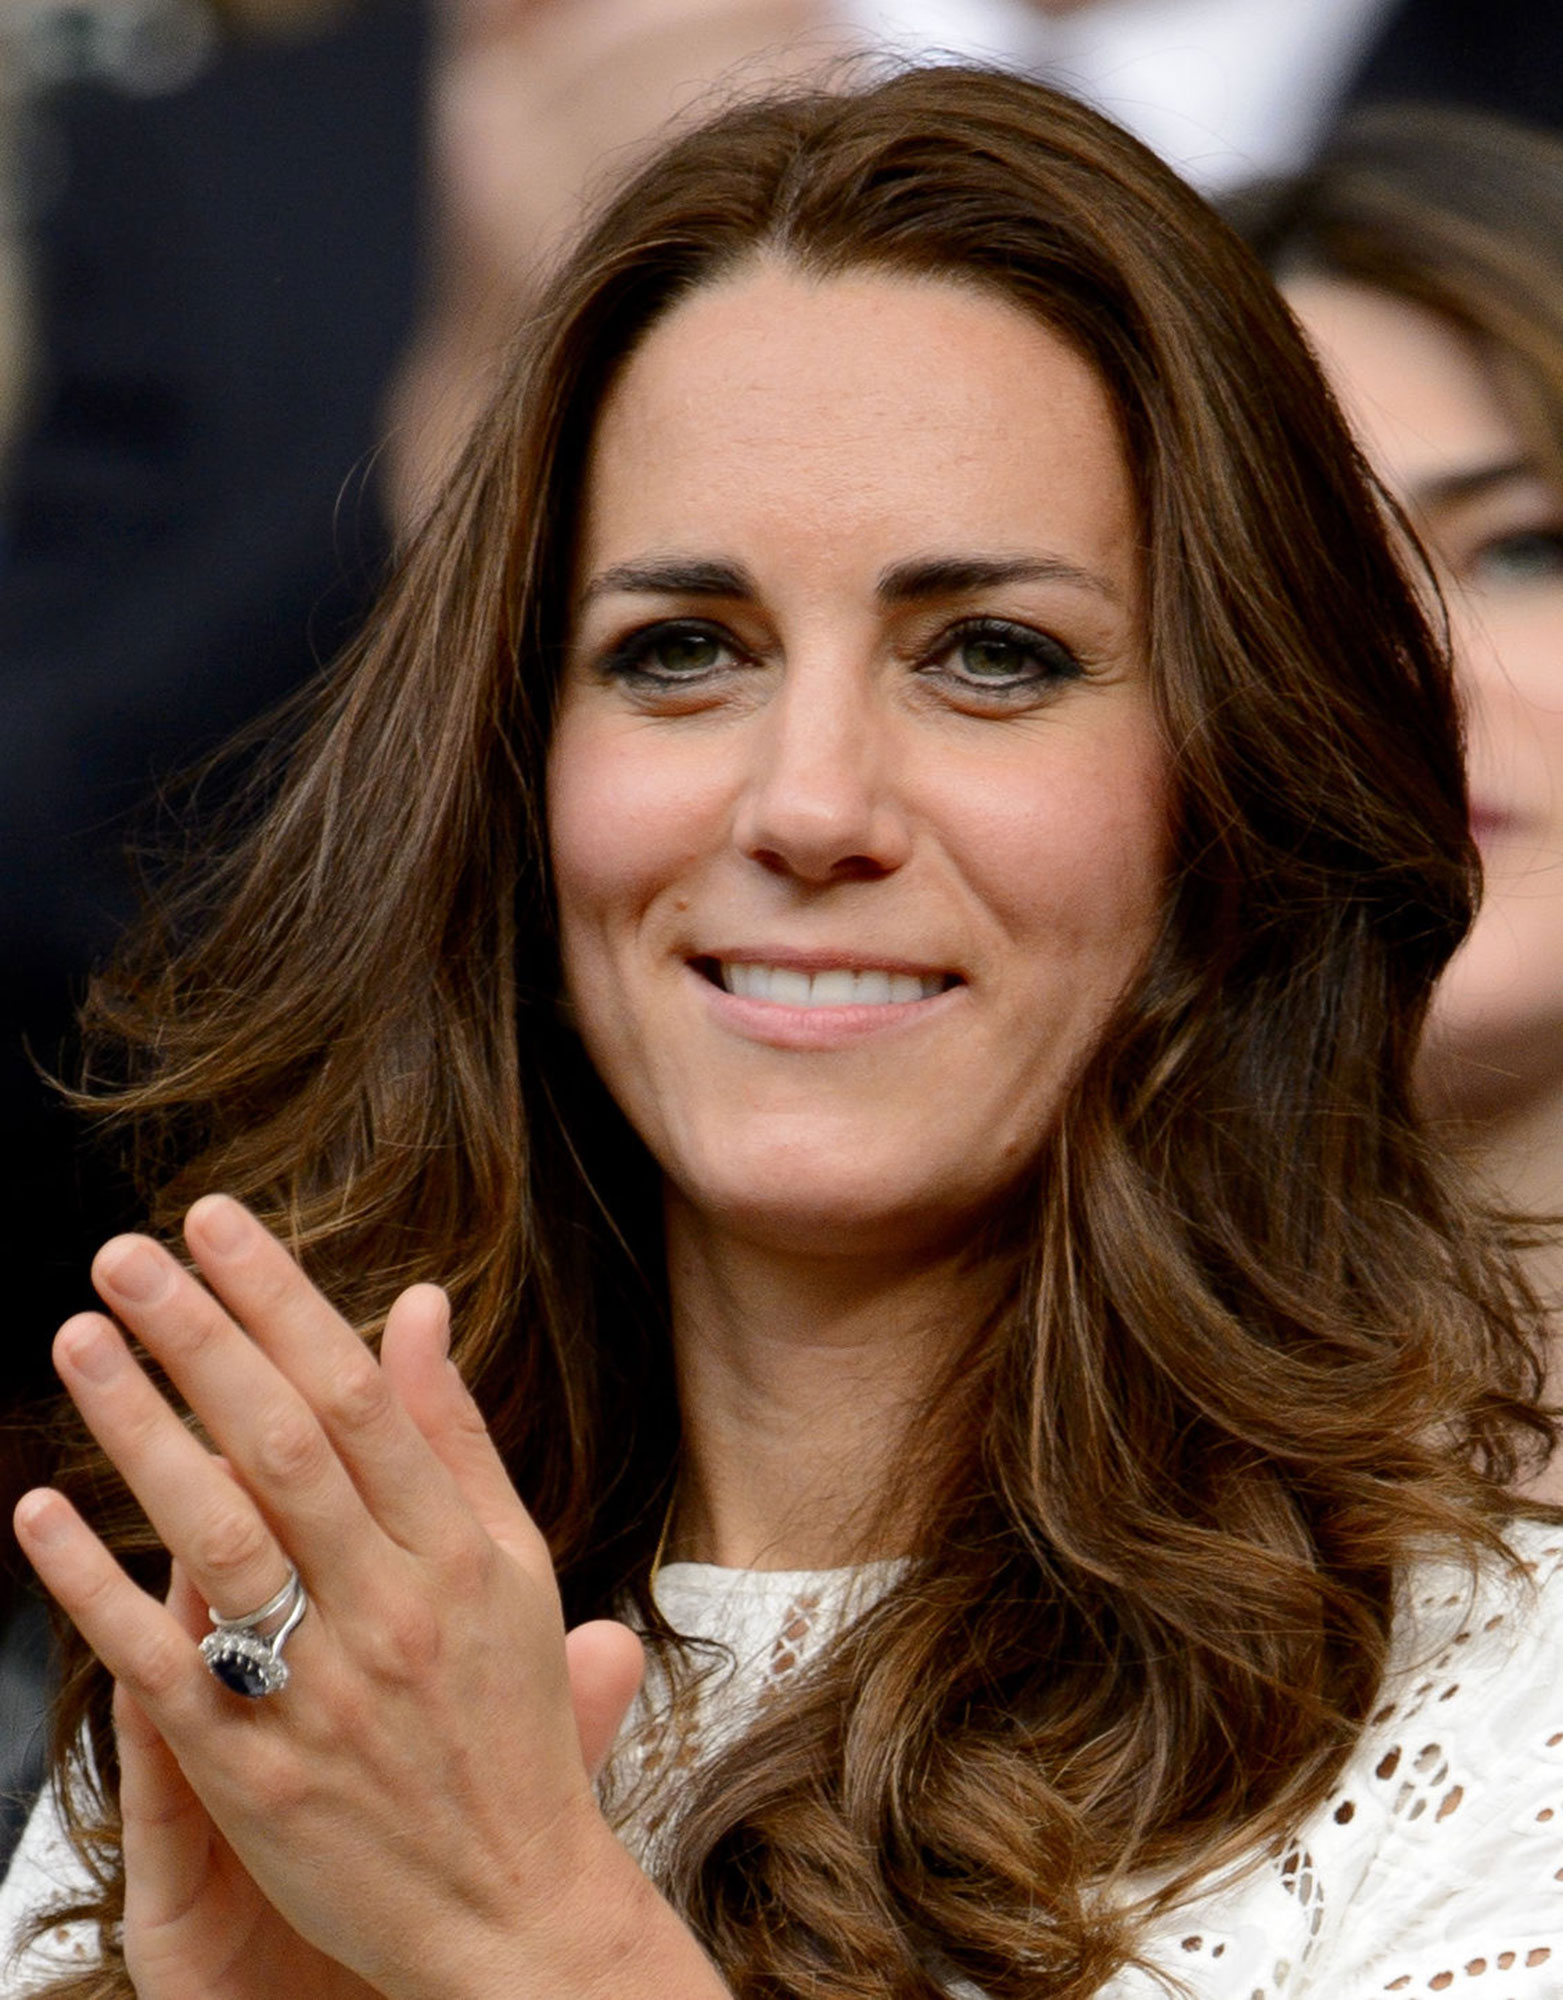 What is the difference between Meghan Markle's engagement ring and Kate  Middleton's engagement ring? - Quora